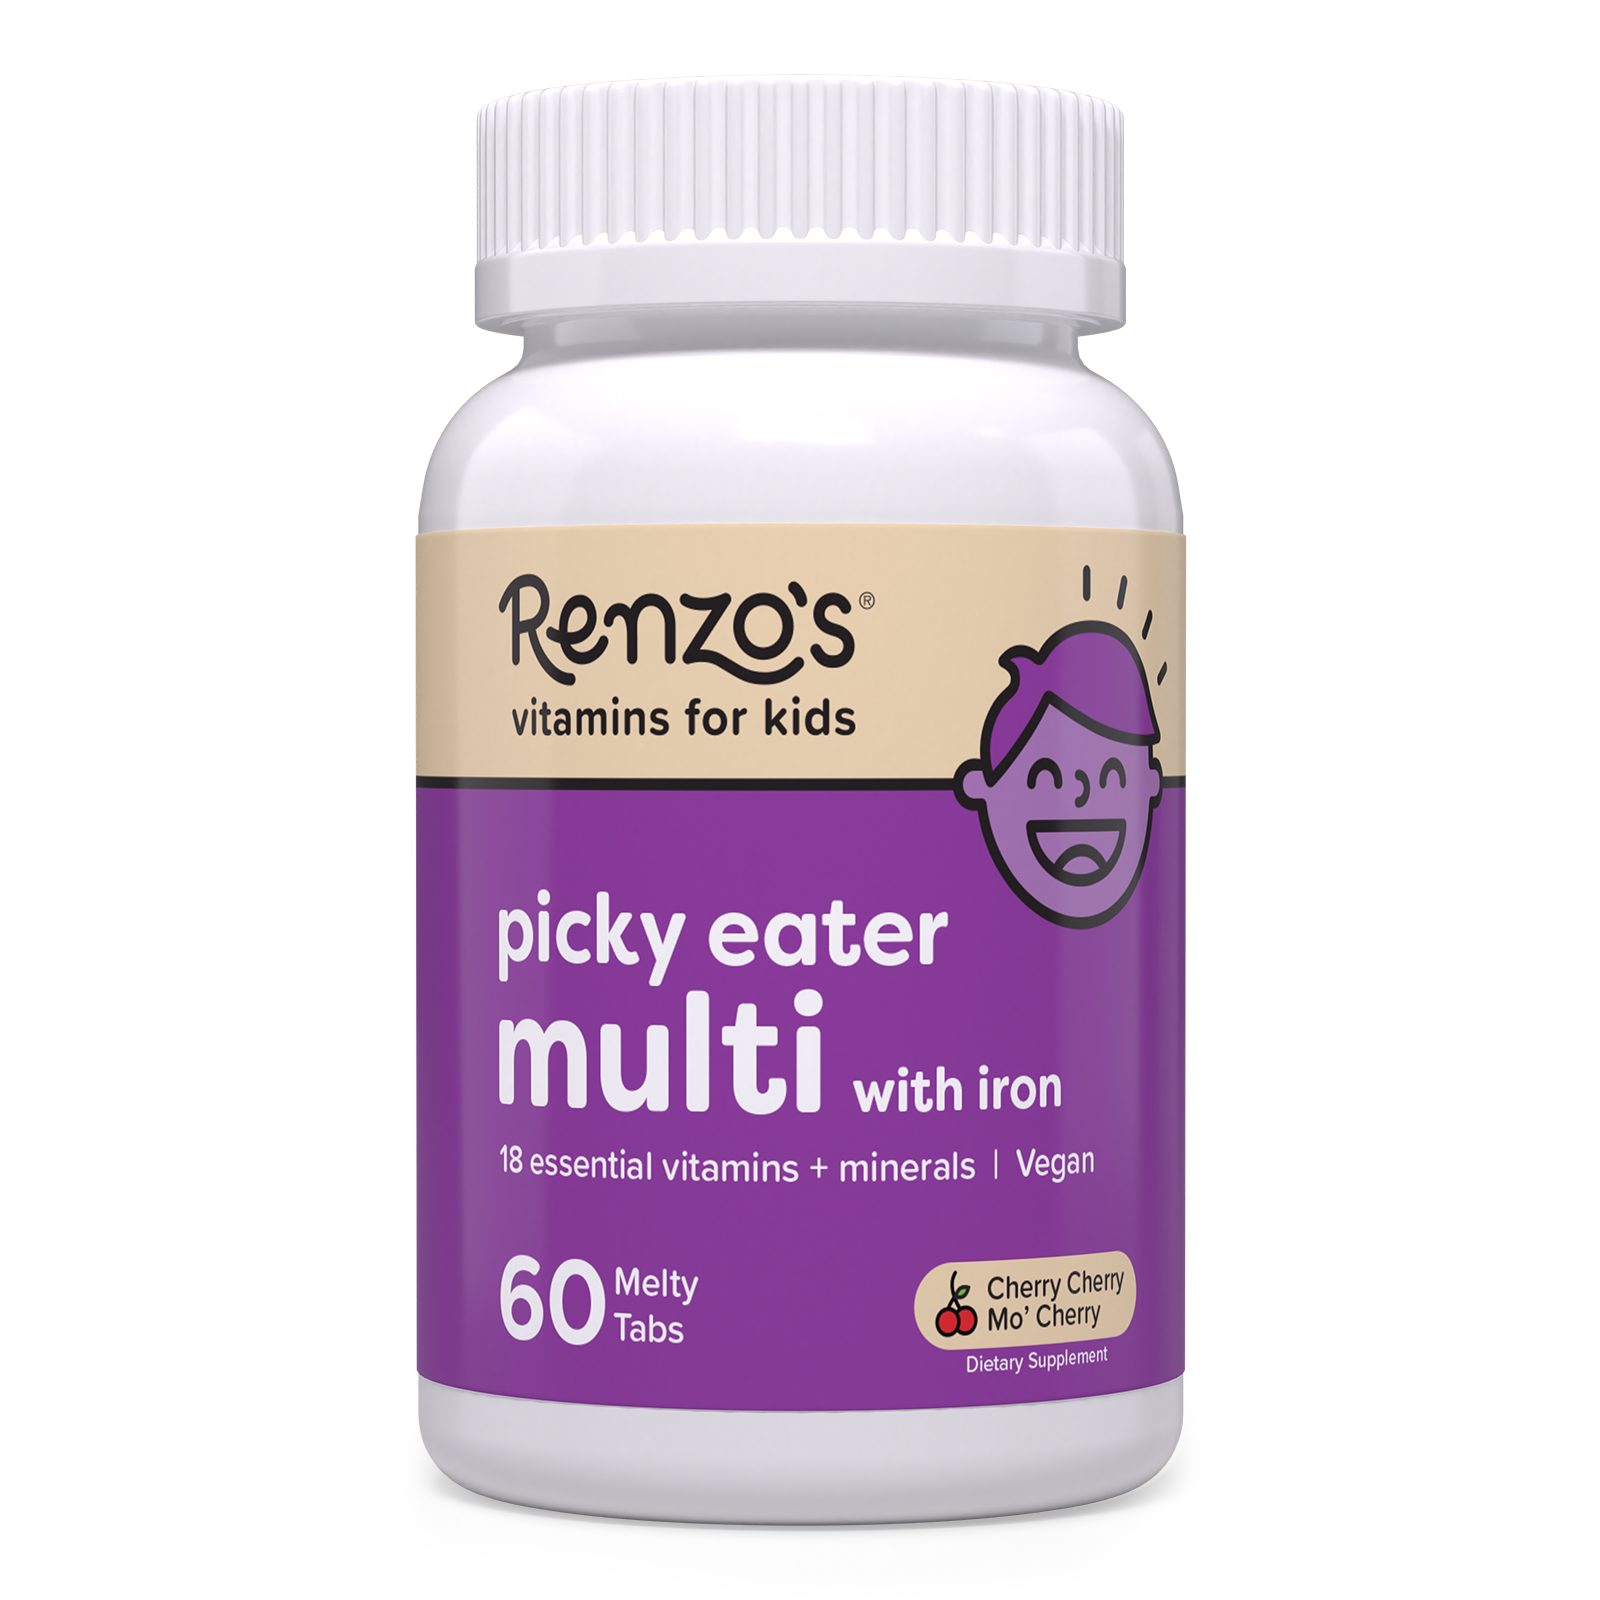 Renzo's Vitamins cherry-flavored childrens multivitamin for picky eaters bottle upright on a white surface 